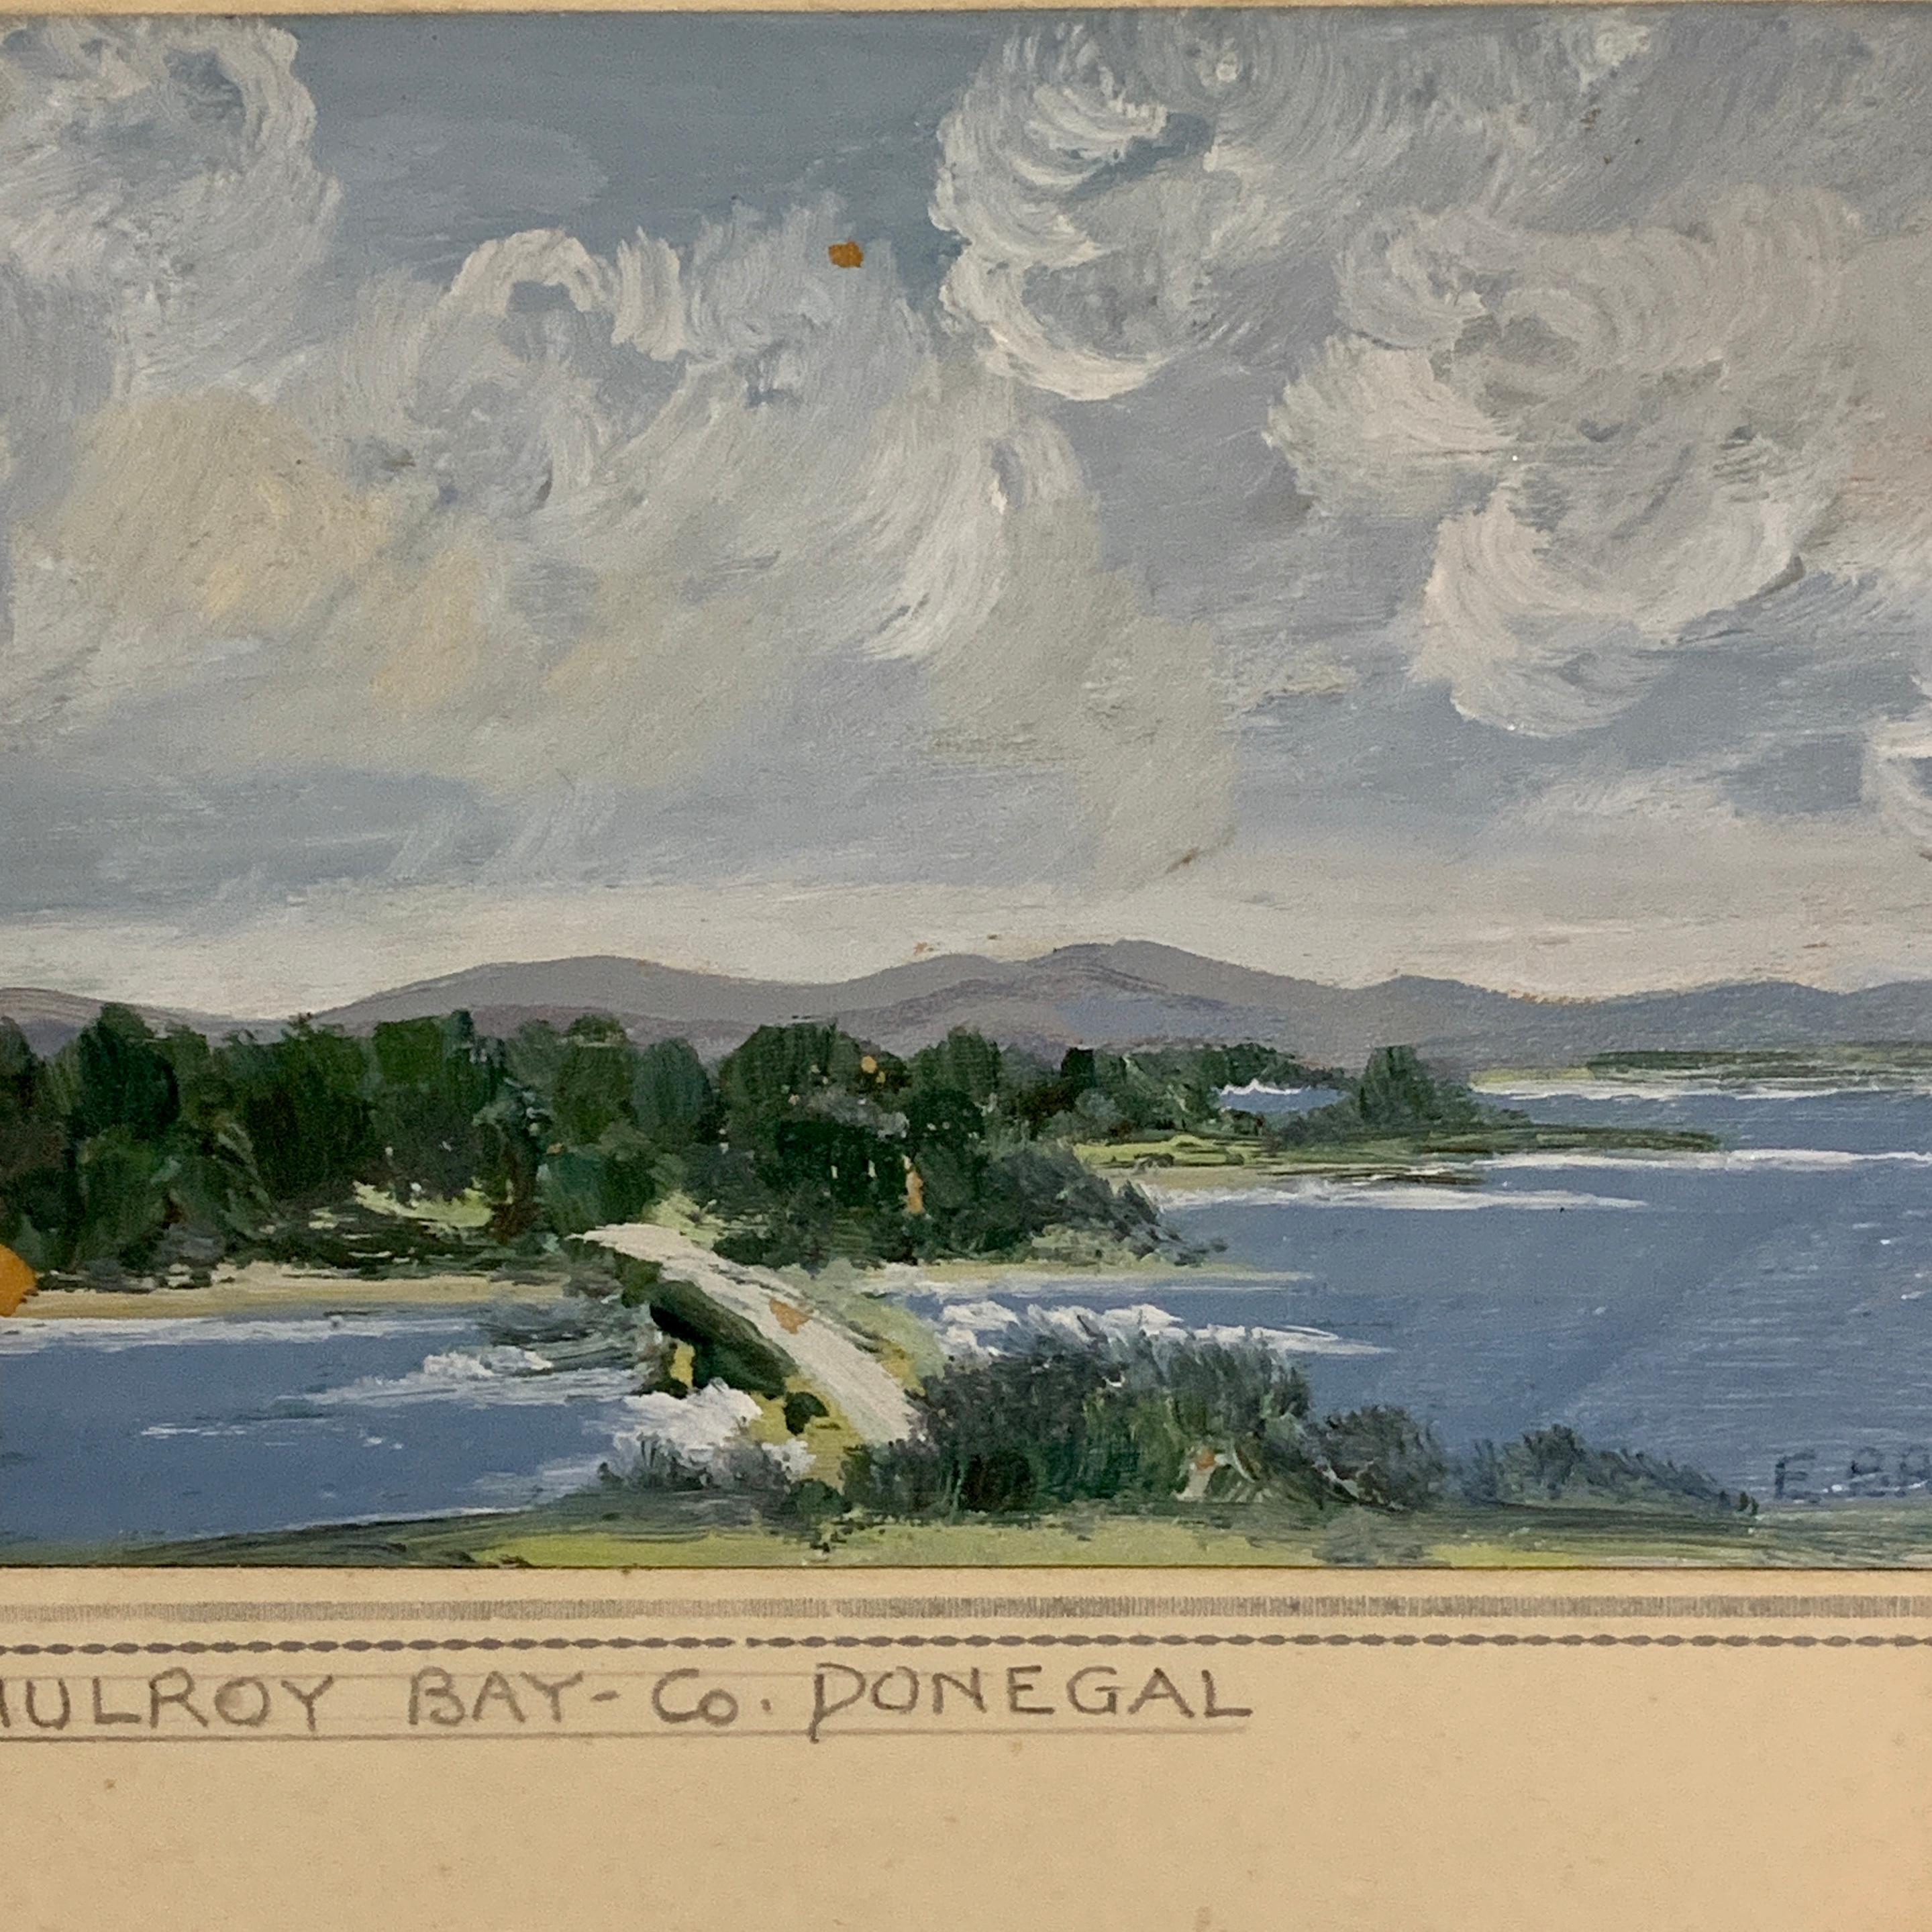 Irish mid century river landscape, Mulroy Bay, Co. Donegal - Painting by F.Bryce